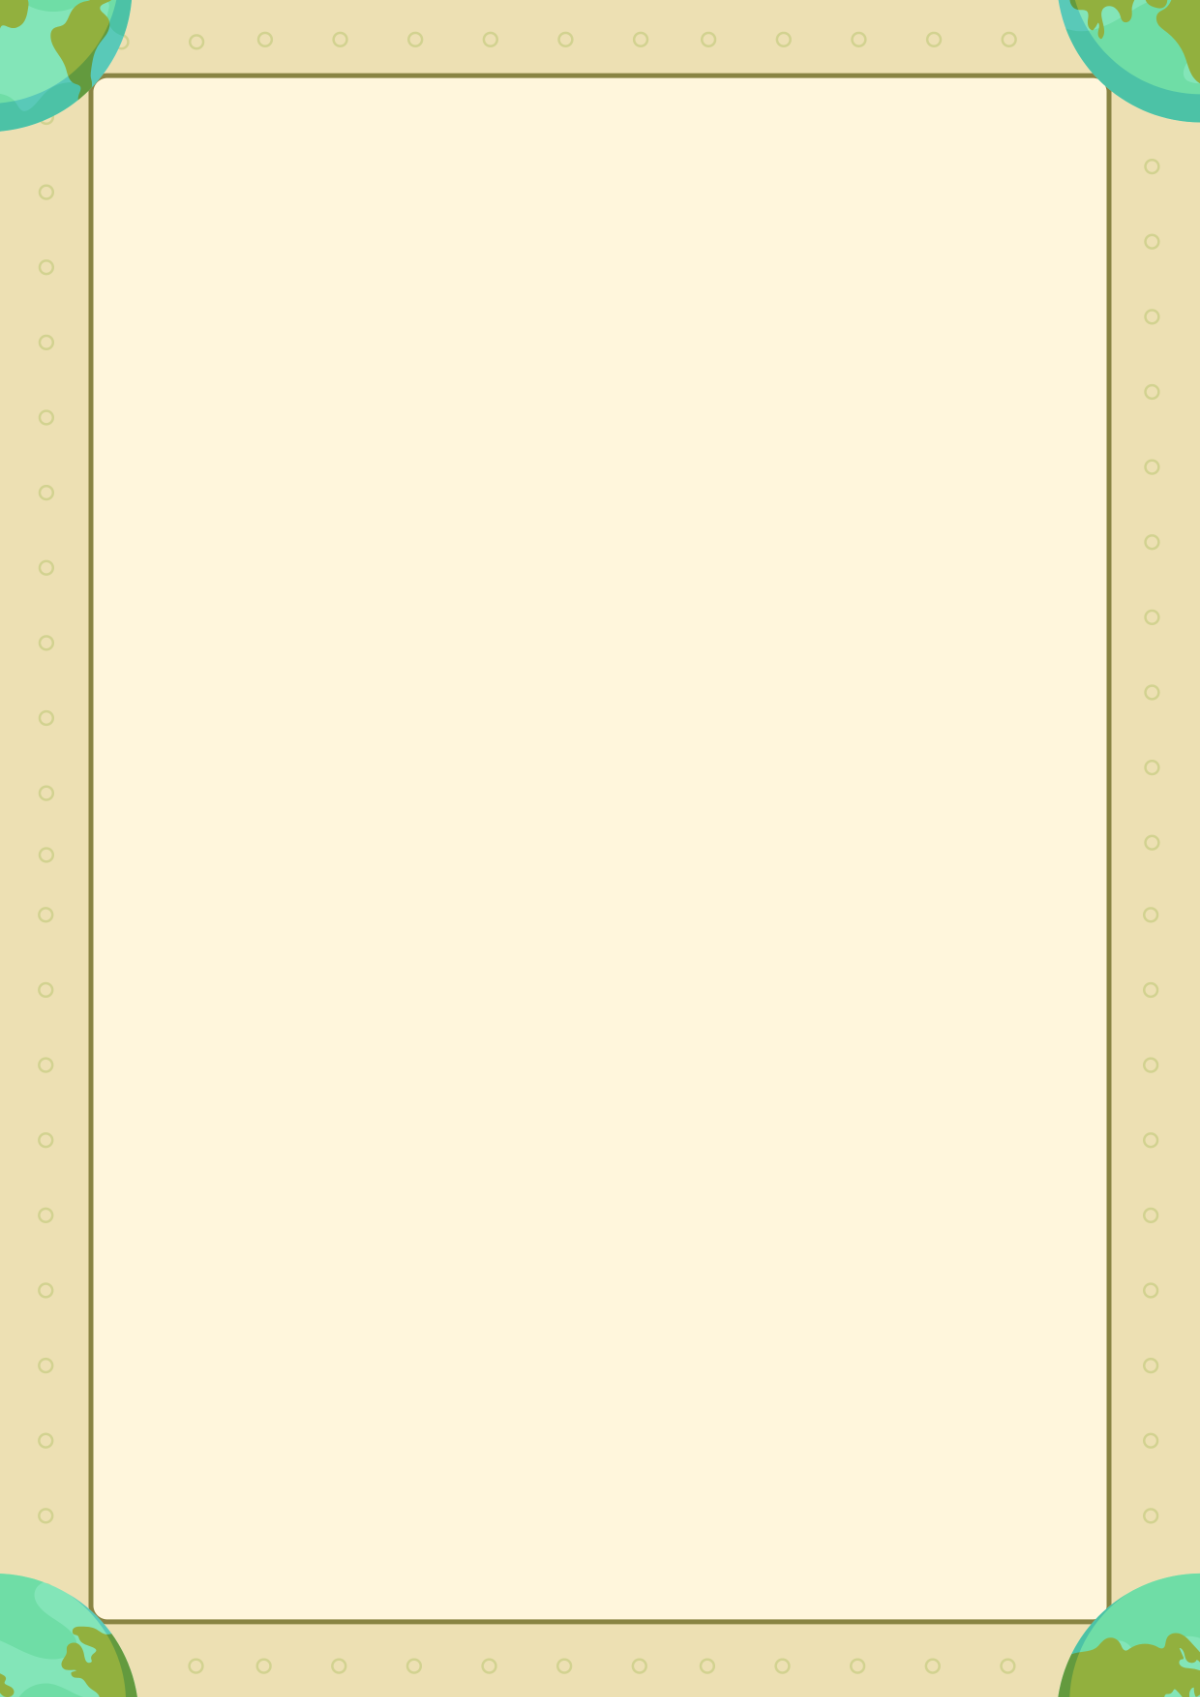 Earth Day Frame Template